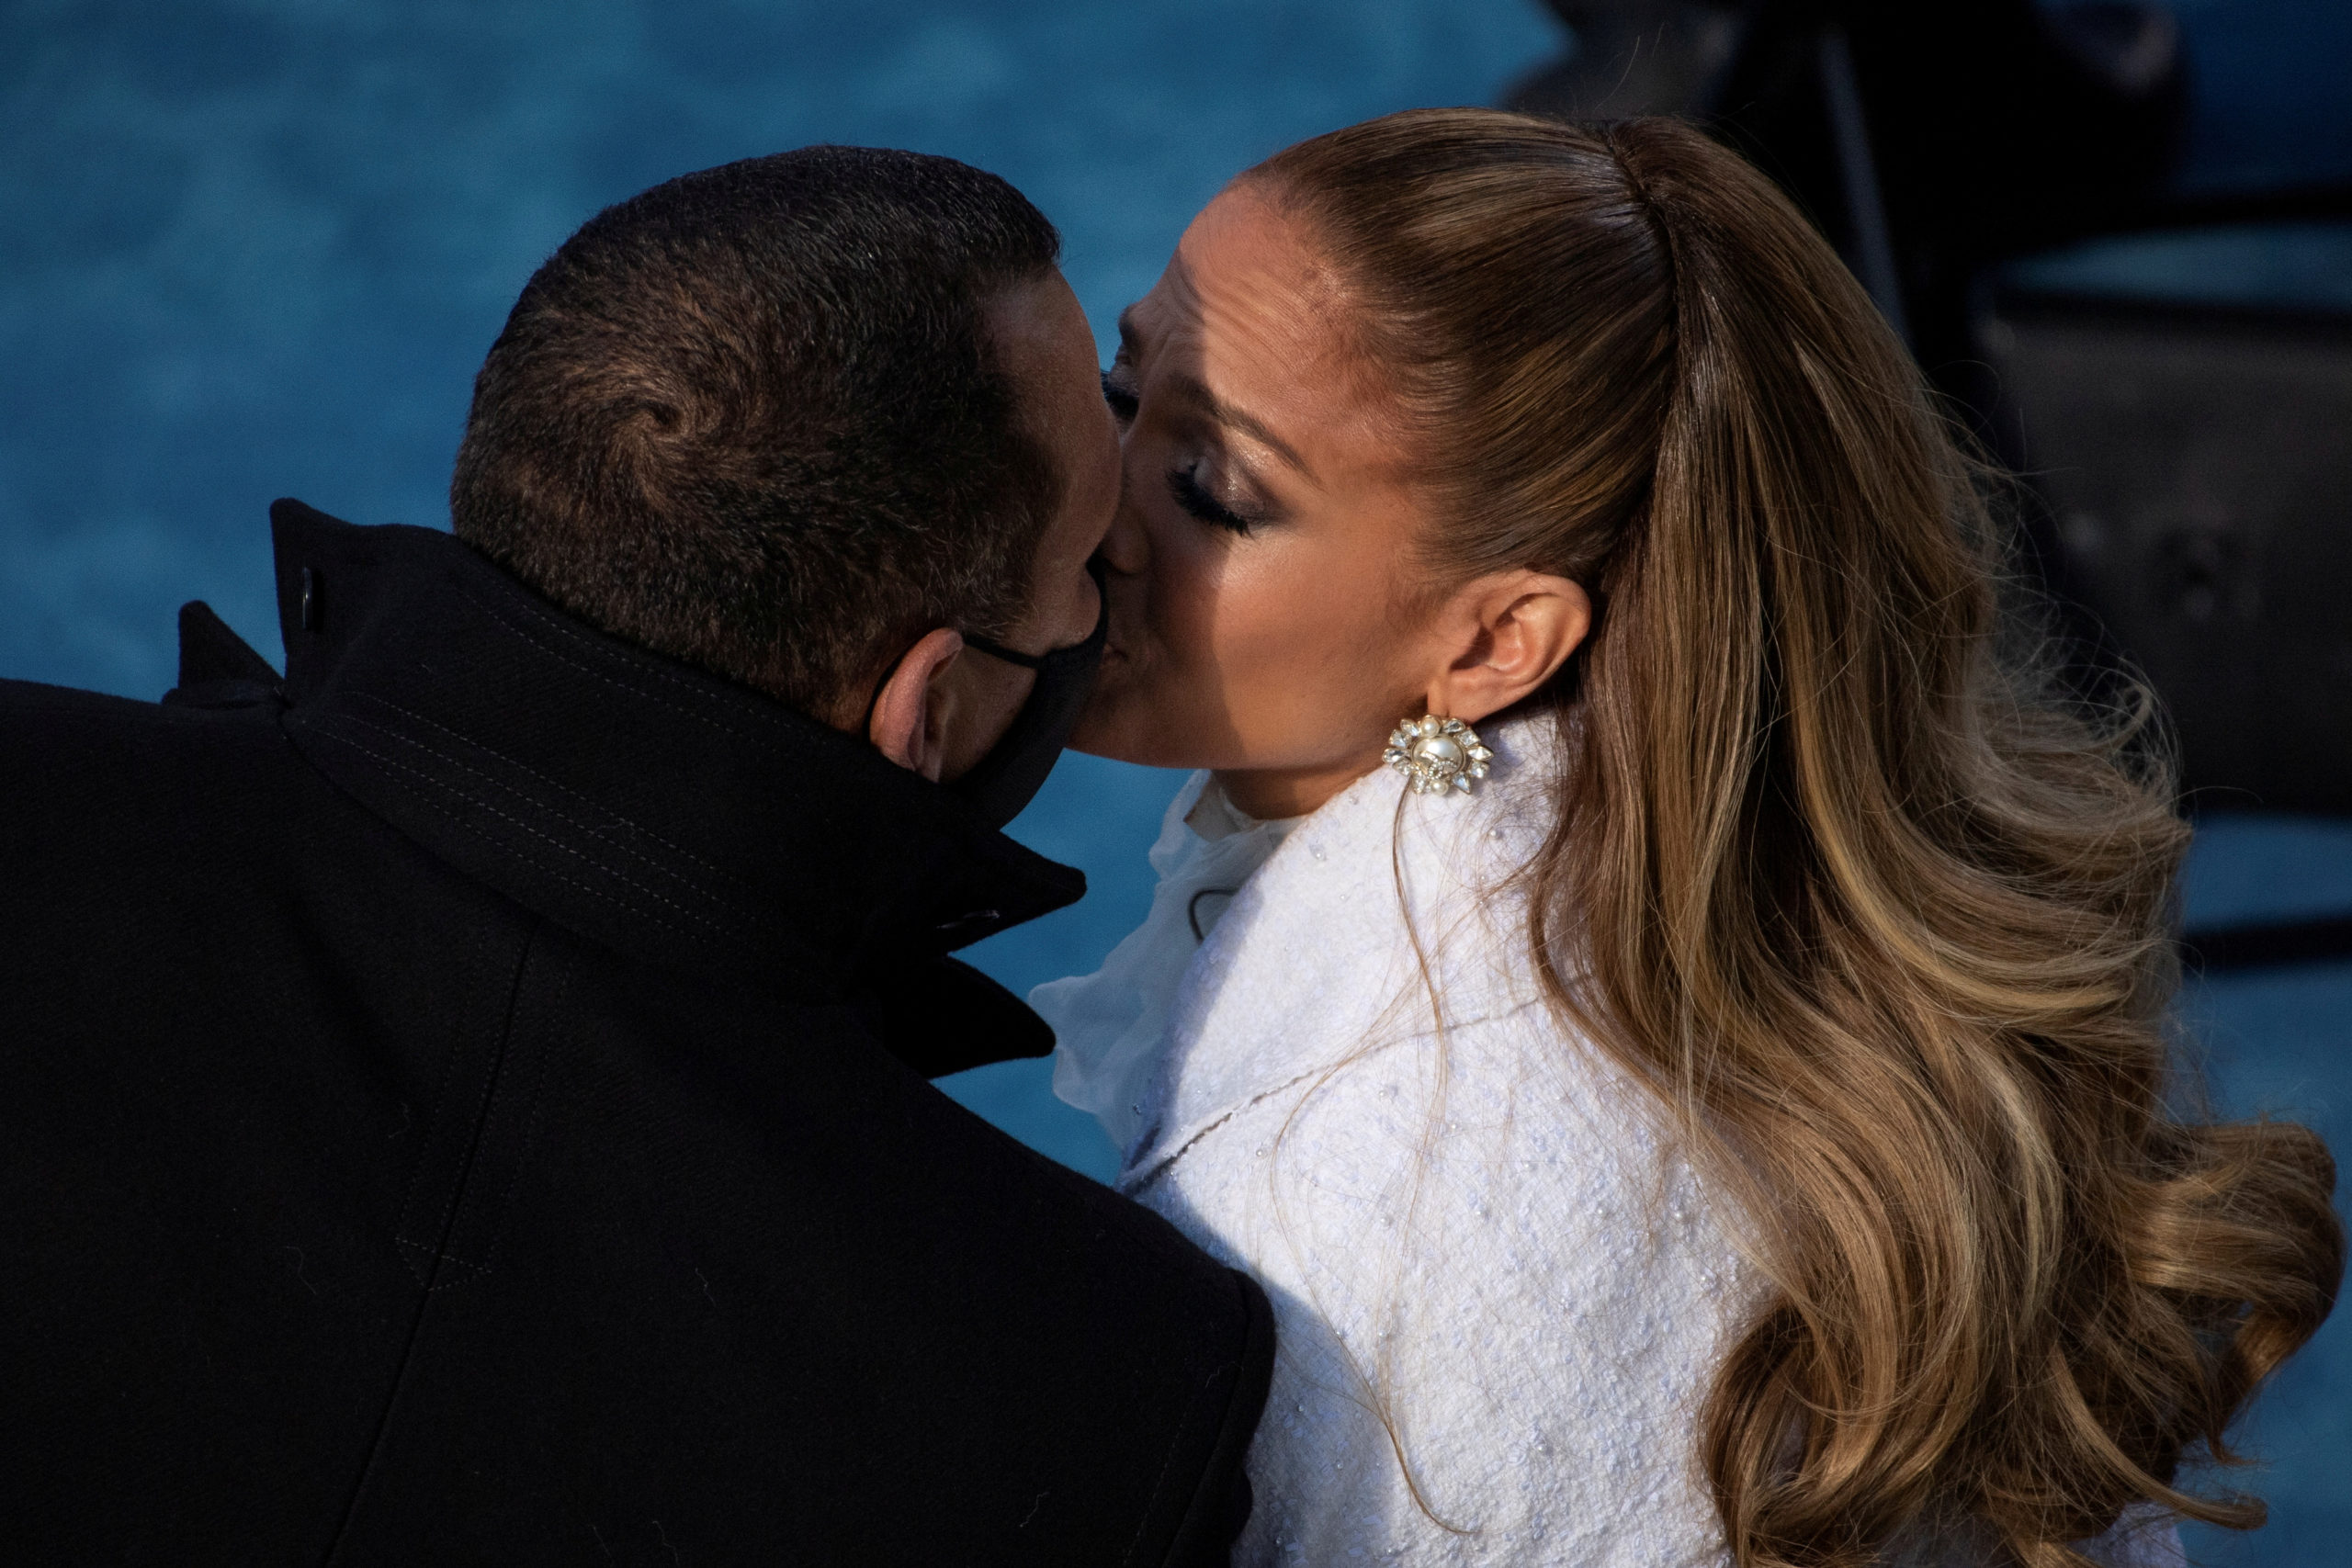 J.Lo and Alex Rodriguez reported to have split after four years